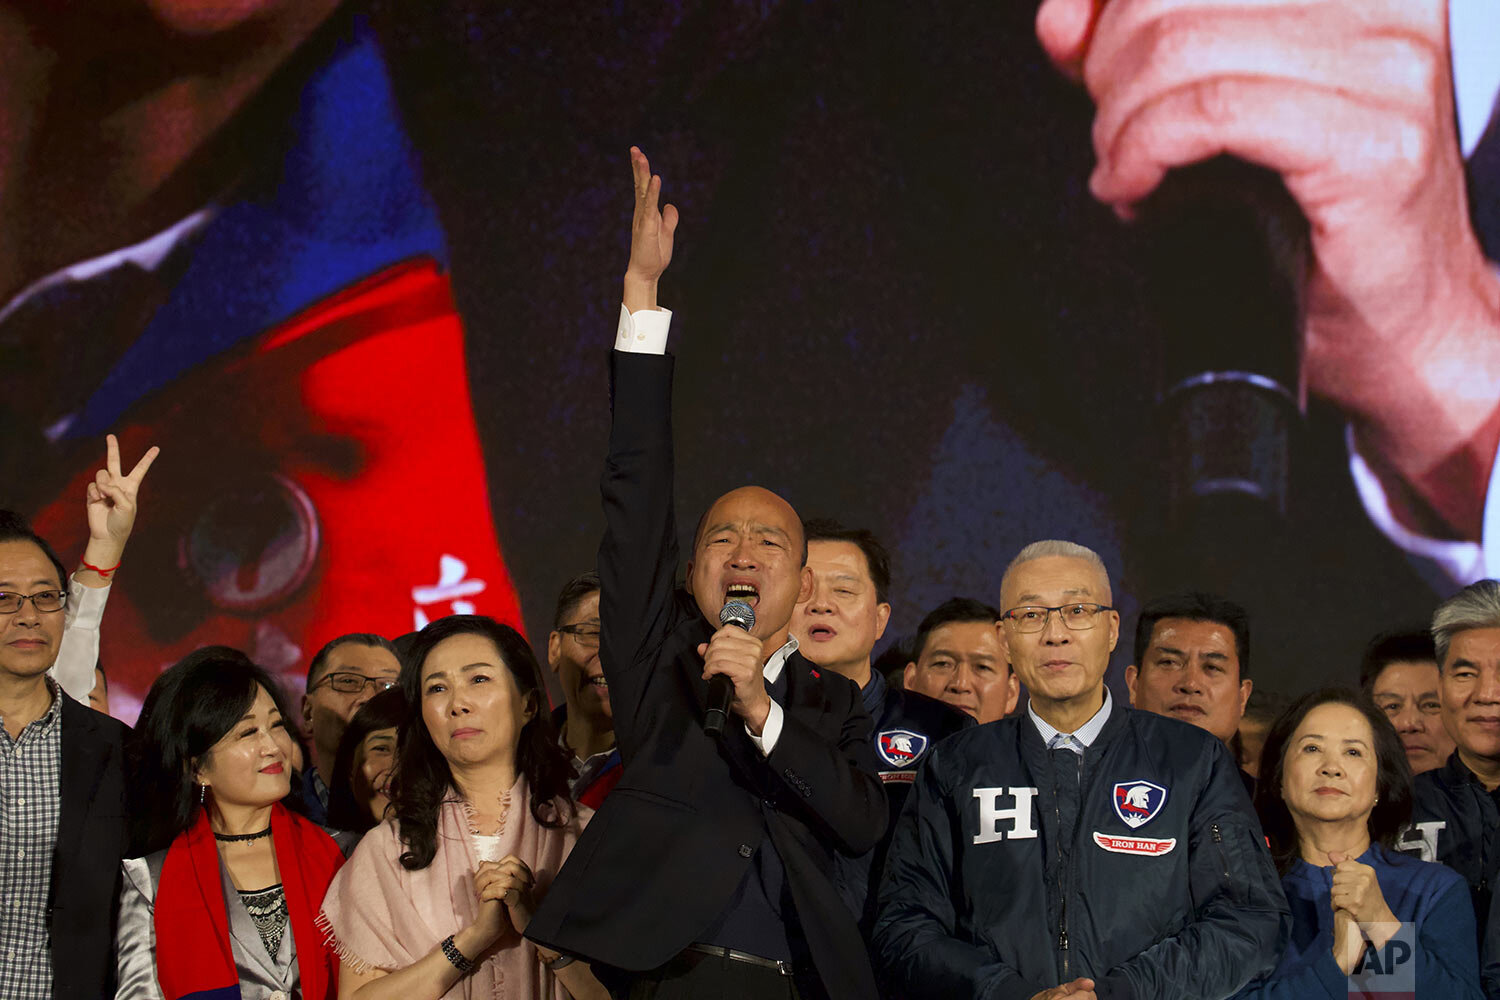  Han Kuo-yu , Taiwan's 2020 presidential election candidate of the KMT or Nationalist Party, speaks during a campaign rally in Taipei, Taiwan, Thursday, Jan. 9, 2020.  (AP Photo/Ng Han Guan) 